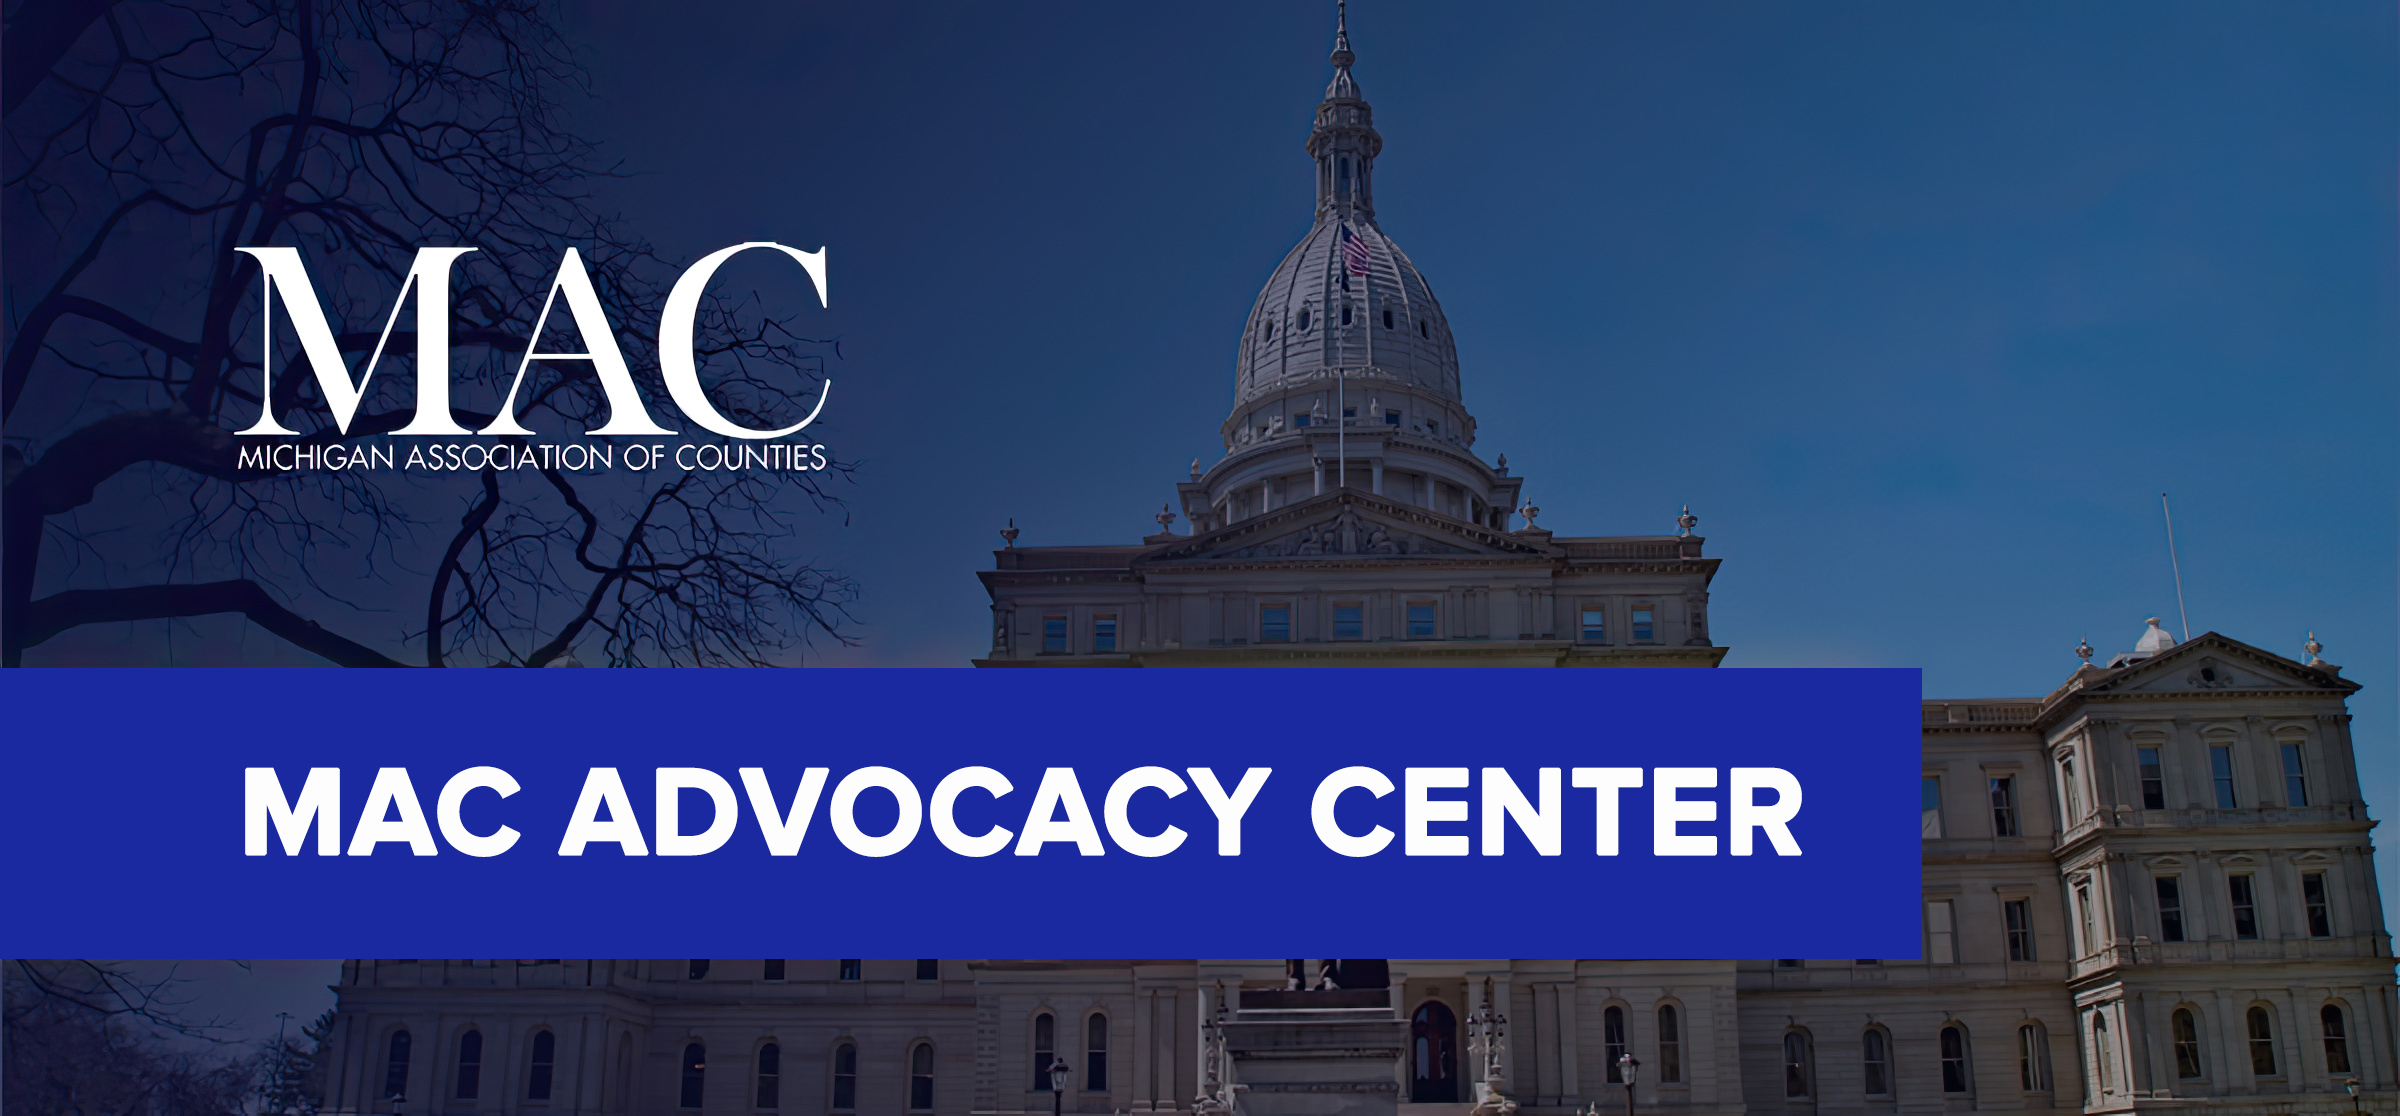 MAC Advocacy Center. As a MAC member your voice matters, be heard today!